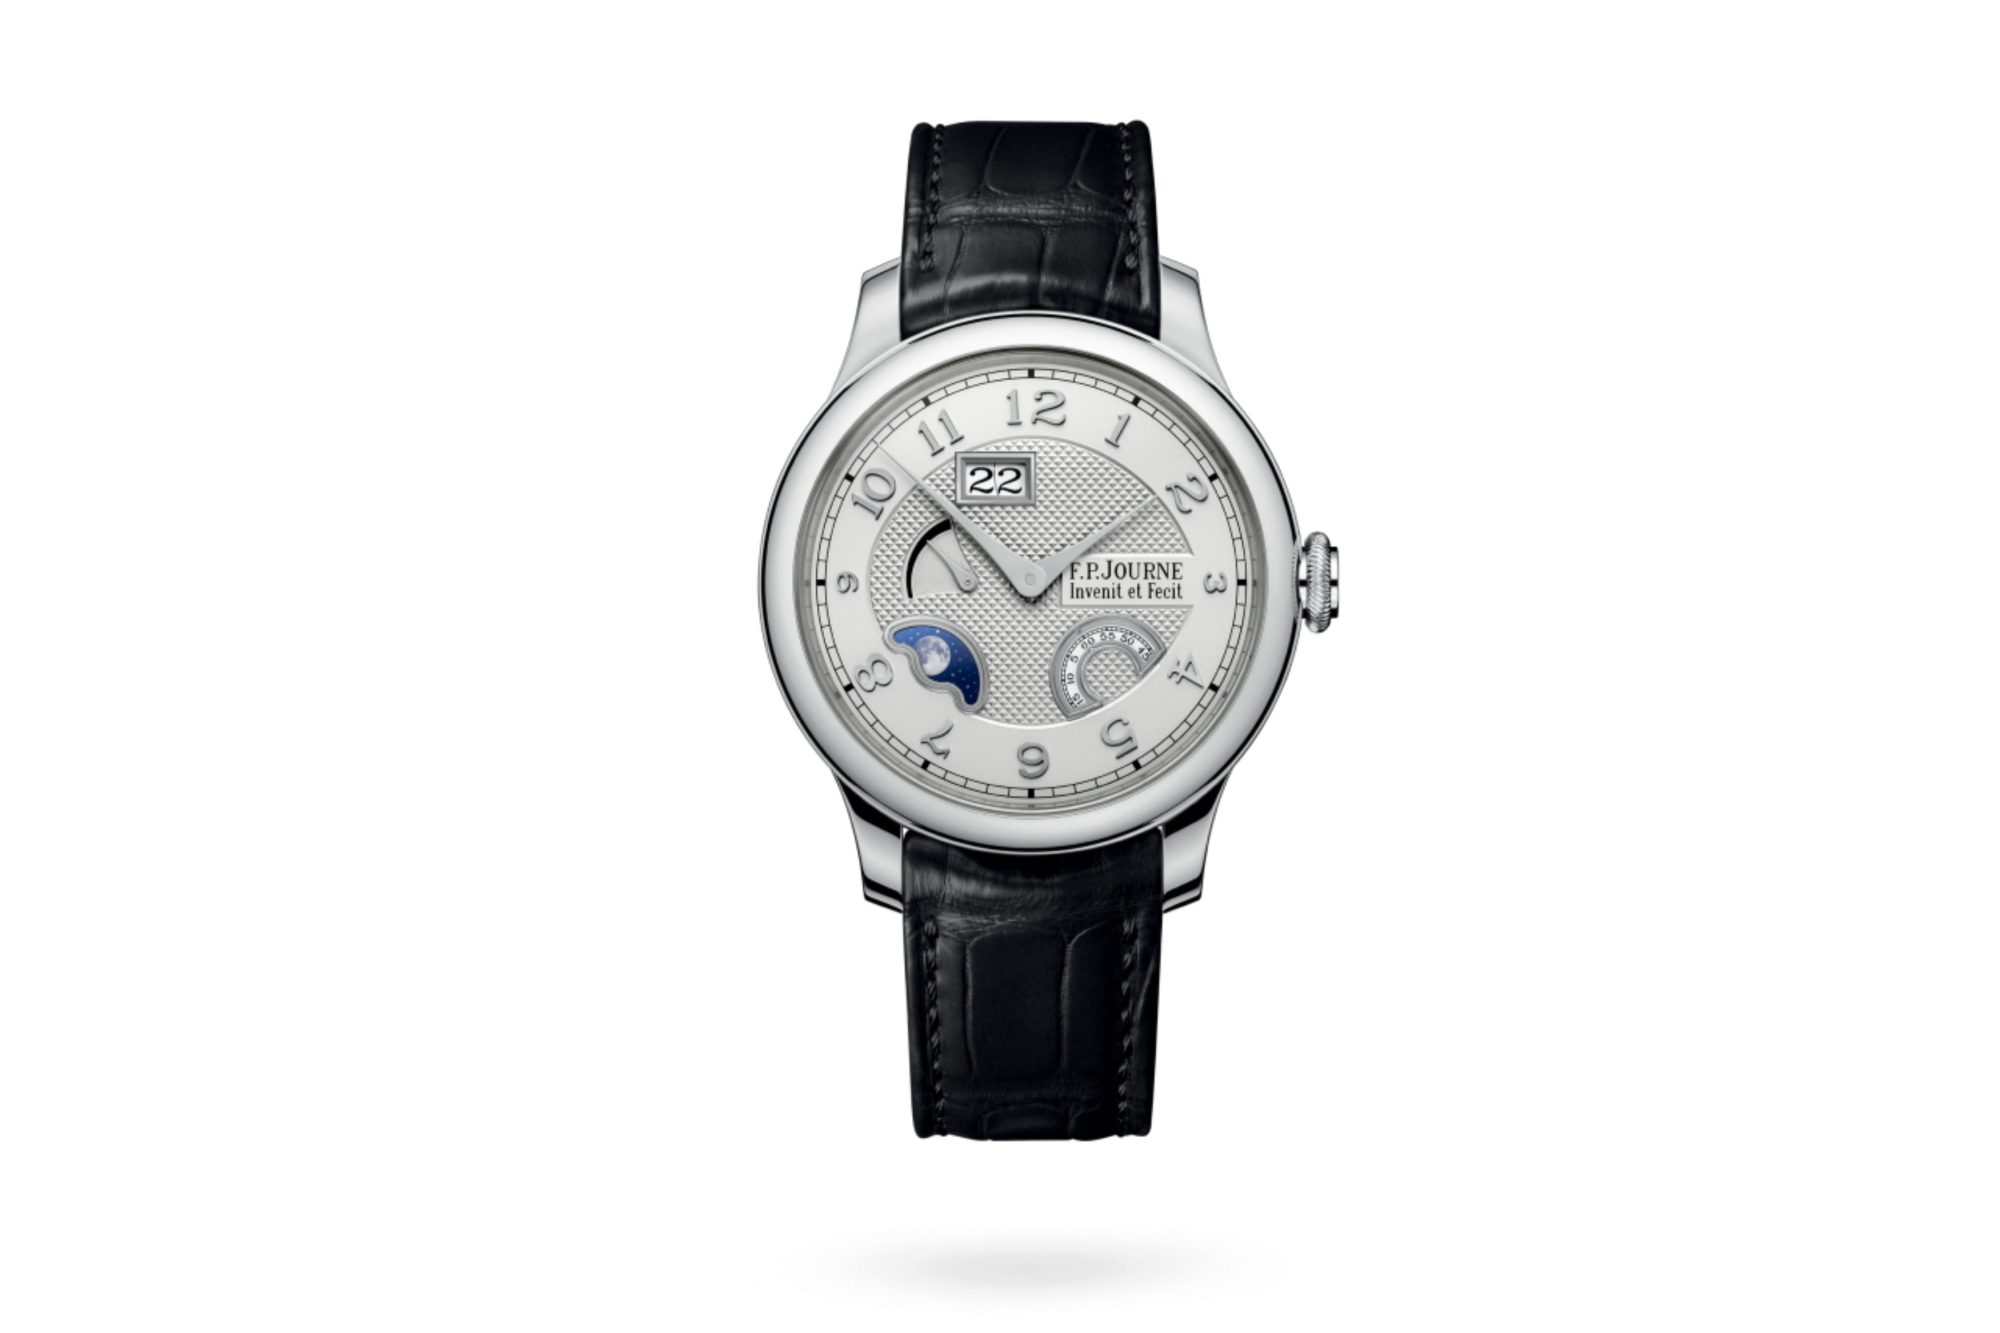 Introducing the F.P.Journe Divine